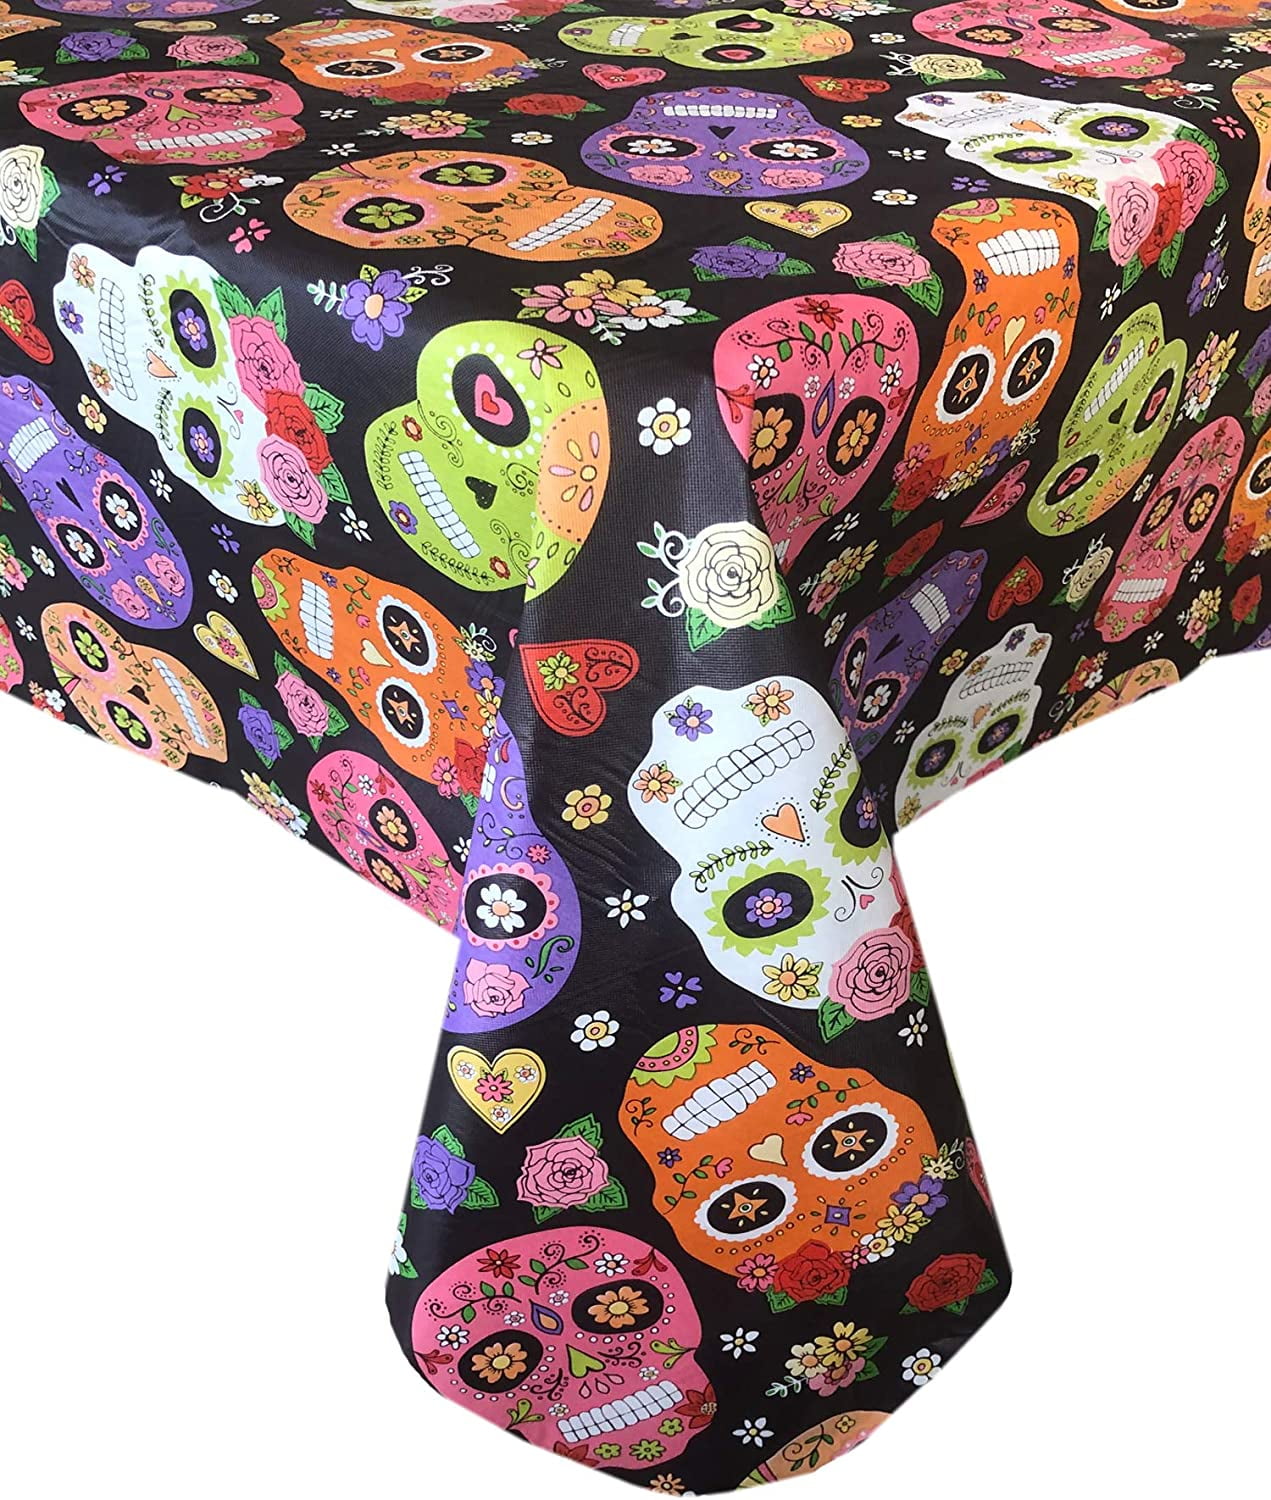 Spooky Night Easy Care Halloween Skeletons Tablecloth 52-by-70 Inch Oblong Rectangular